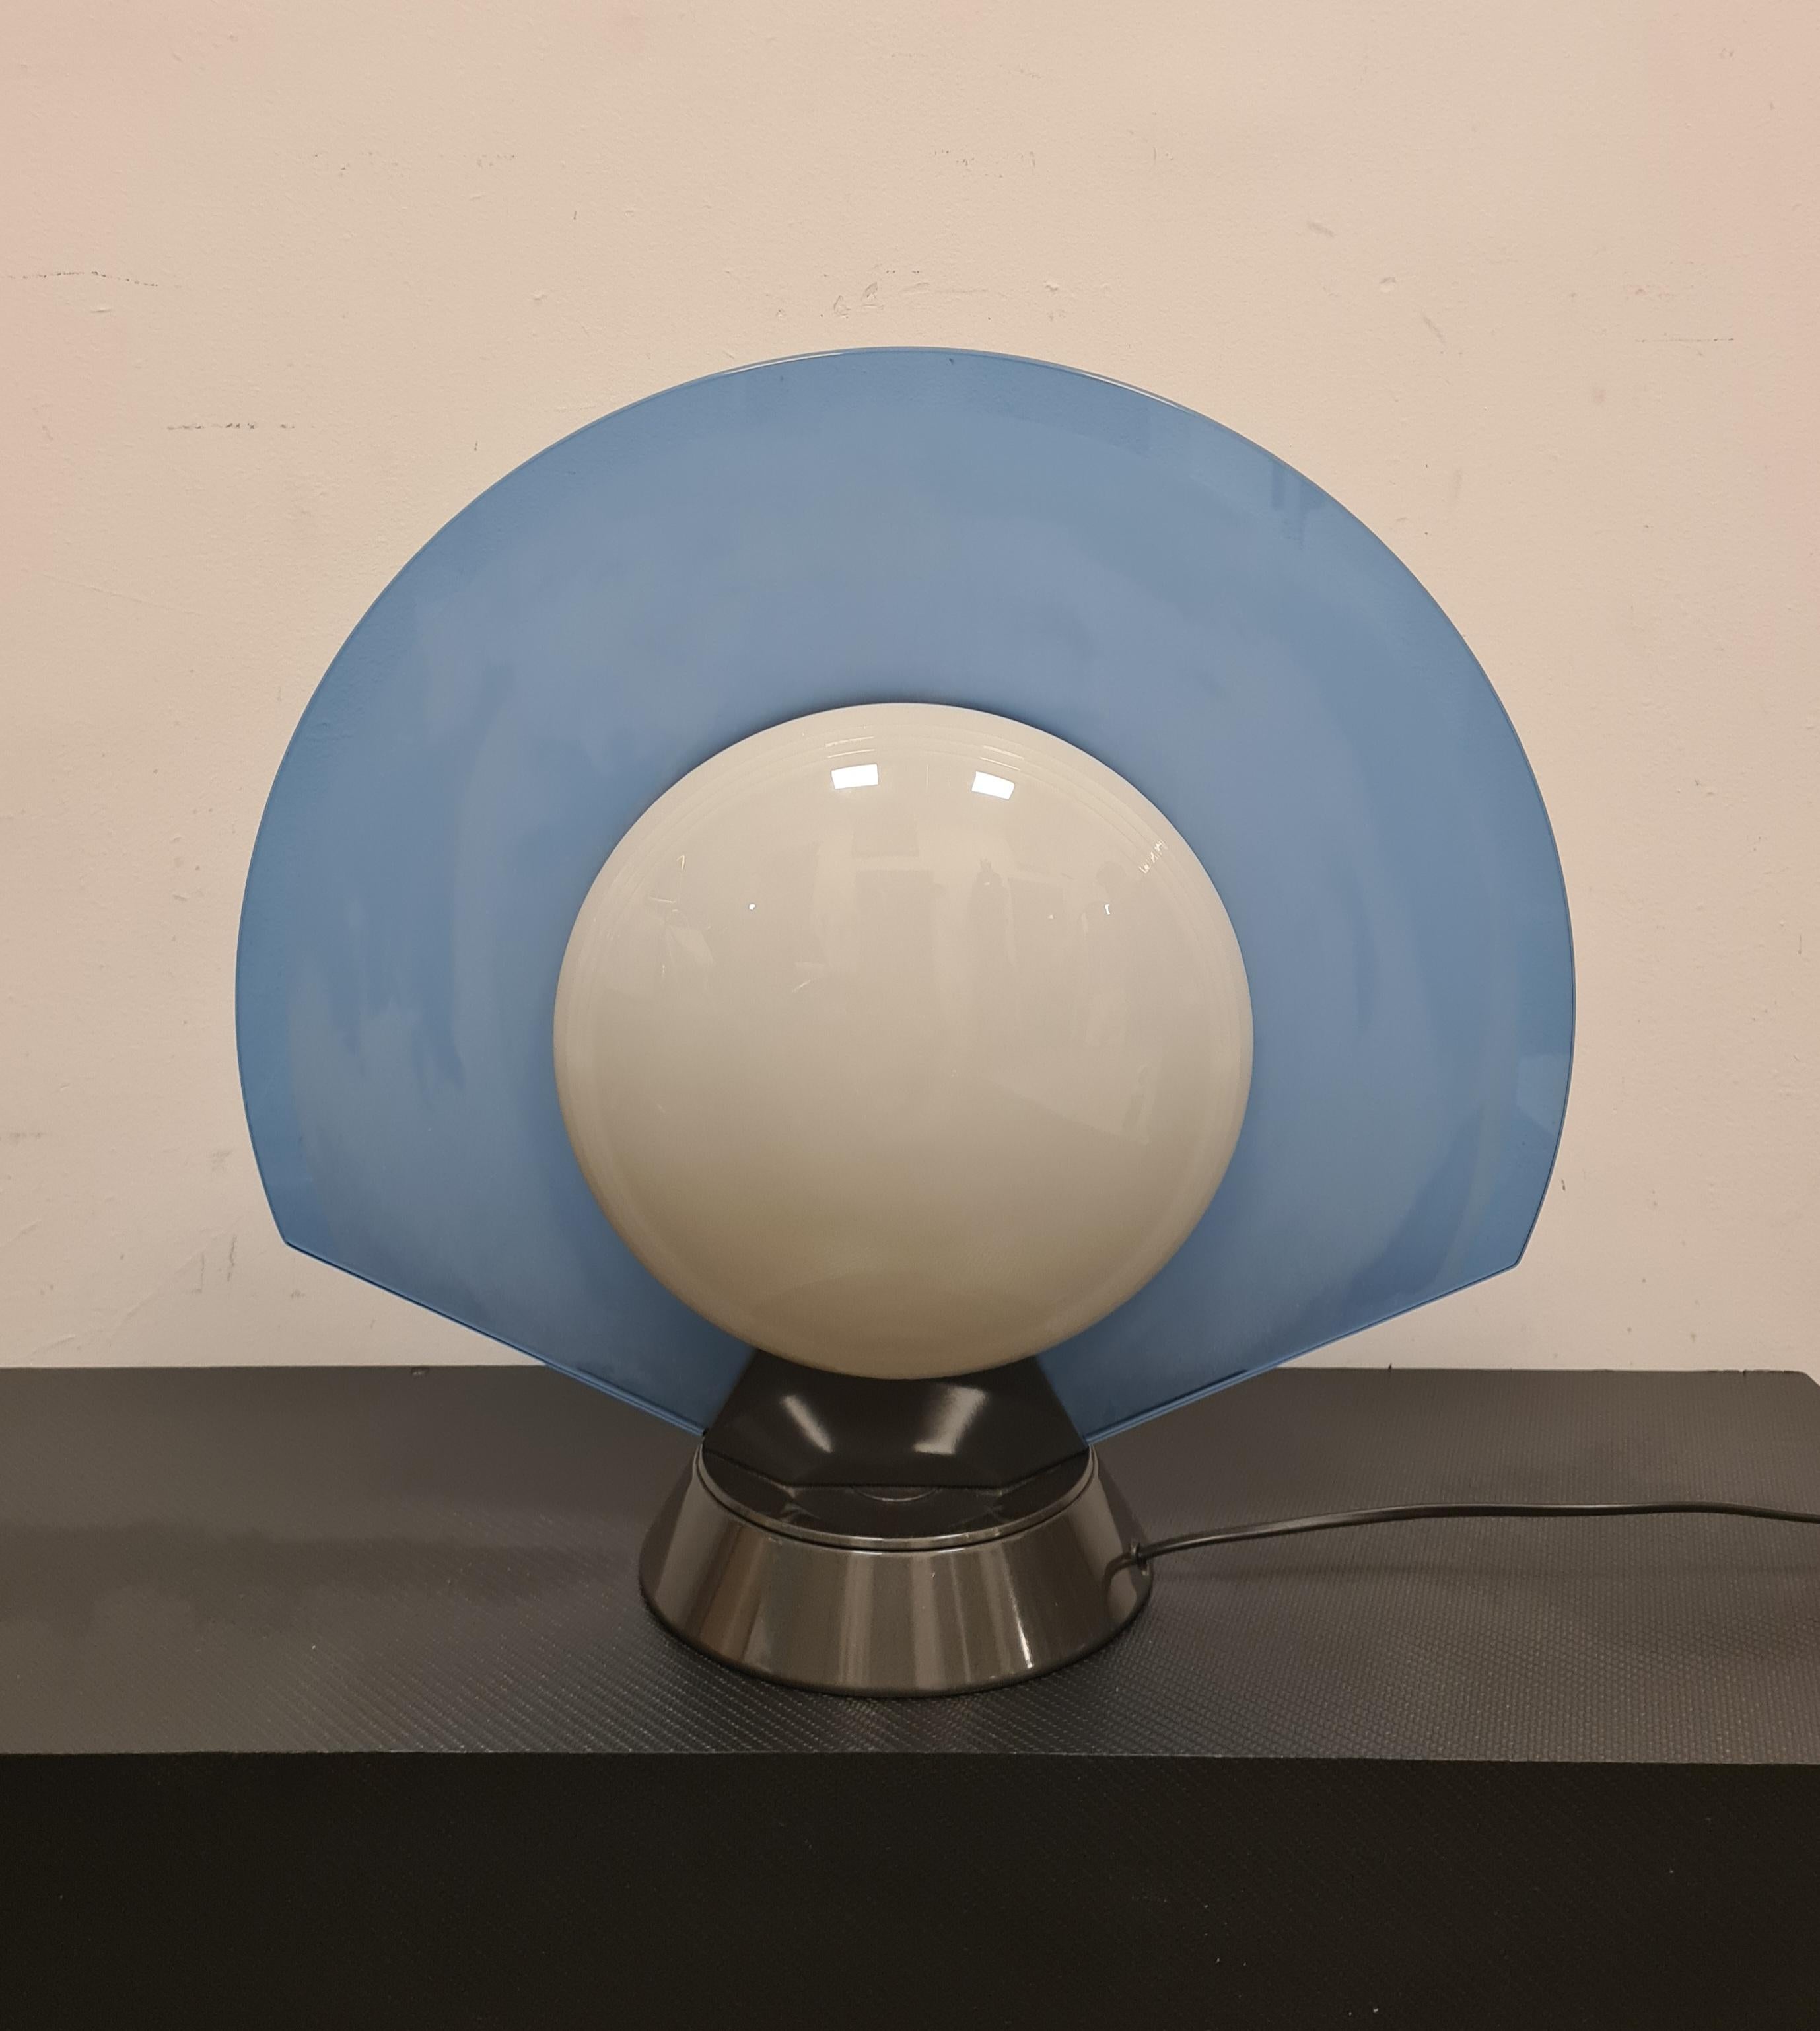 Table lamp model Tikal 1555 designed by Pier Giuseppe Ramella for Arteluce.

Elegant table lamp model Tikal 1555, the name and shape recall the Mayan culture.

The lamp has a swivel lacquered metal base on which rests a blue glass on one side